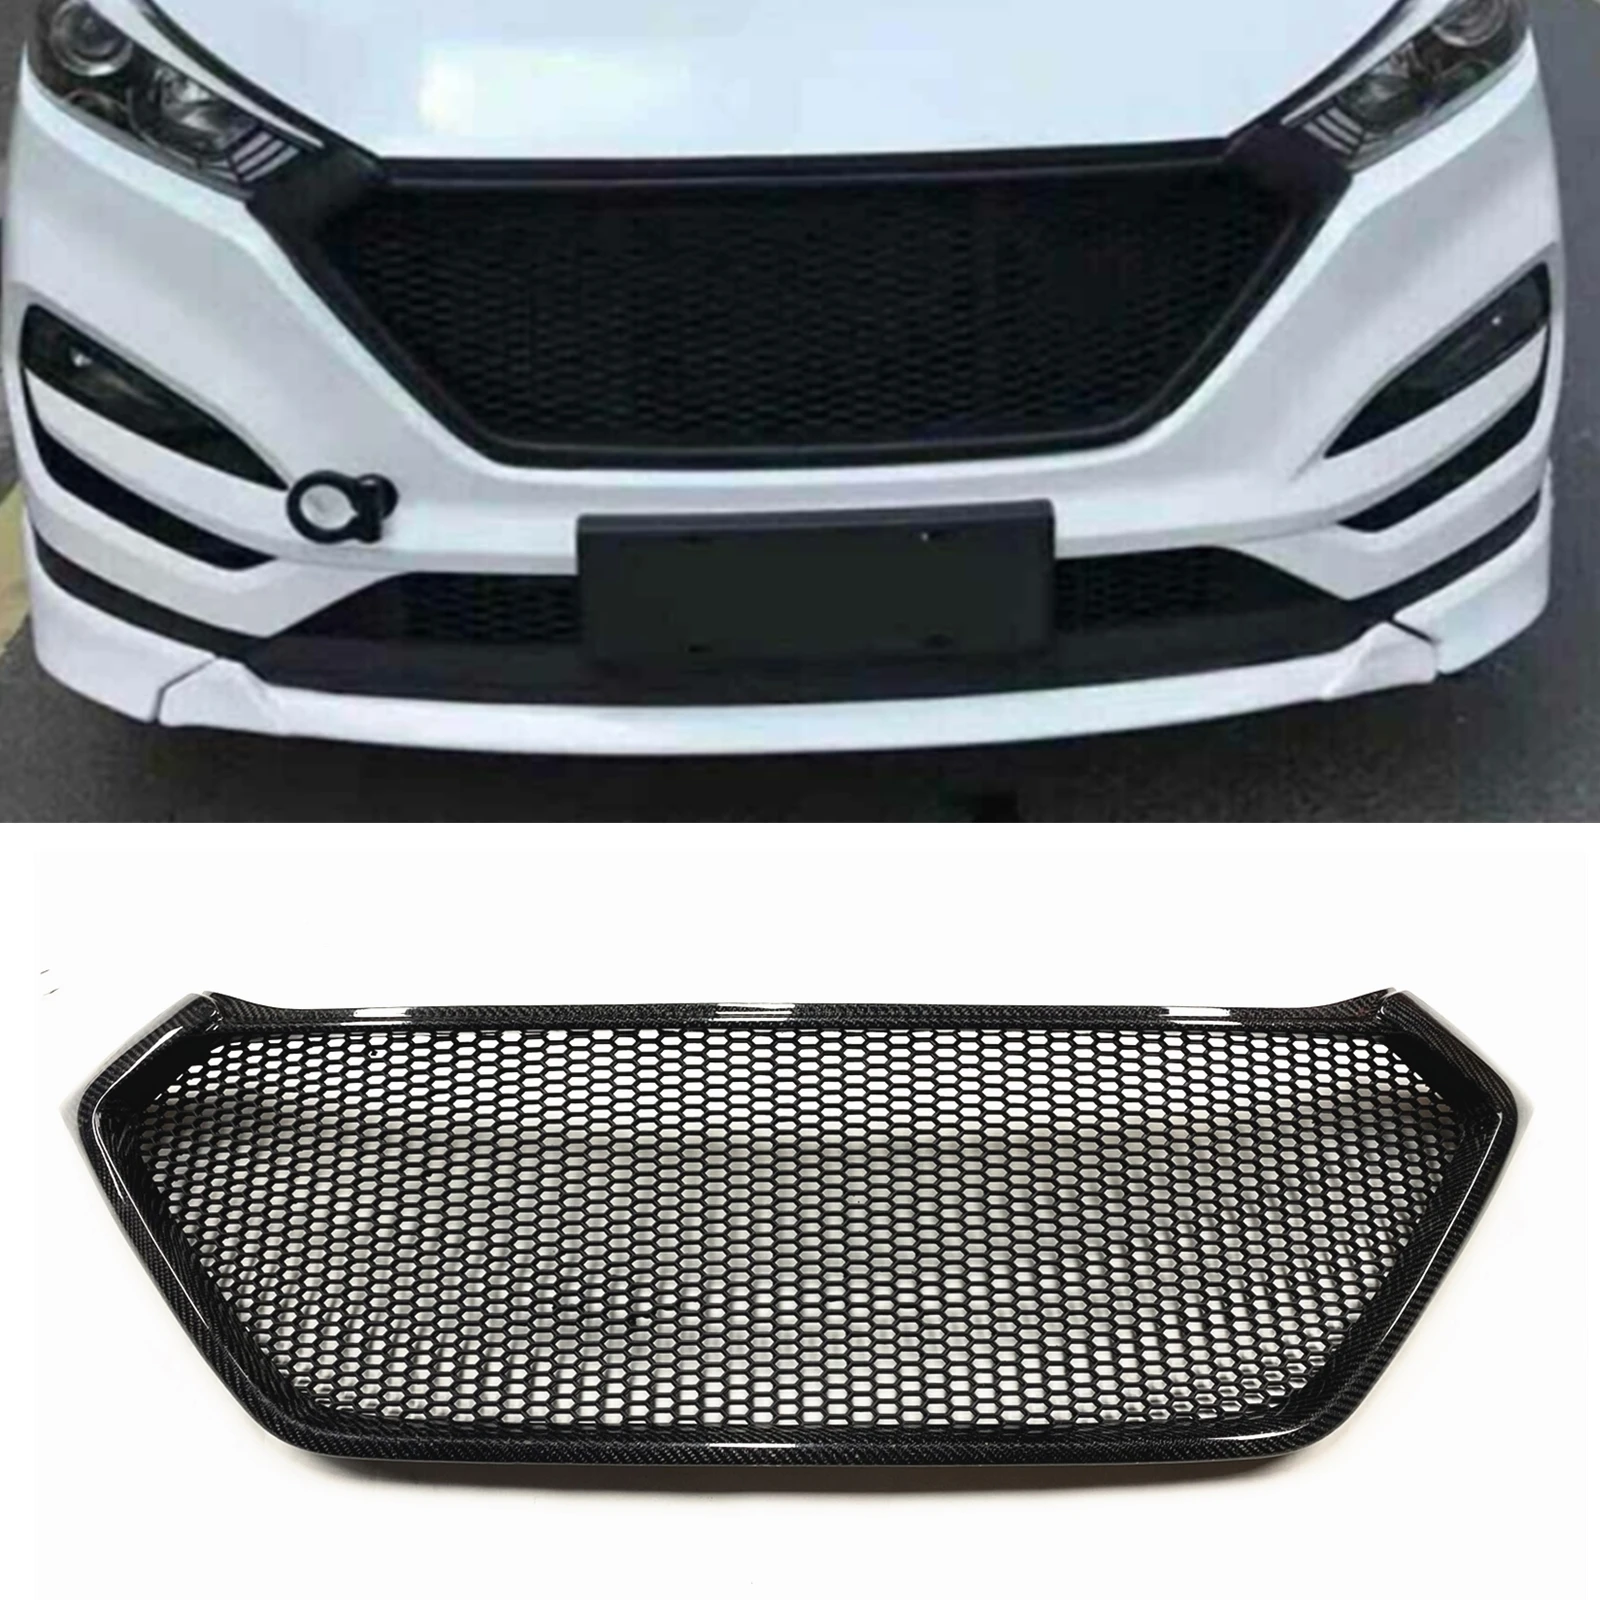 

Front Racing Grills Grille Car Upper Replacement Bumper Hood Mesh For Hyundai Tucson 2016 2017 2018